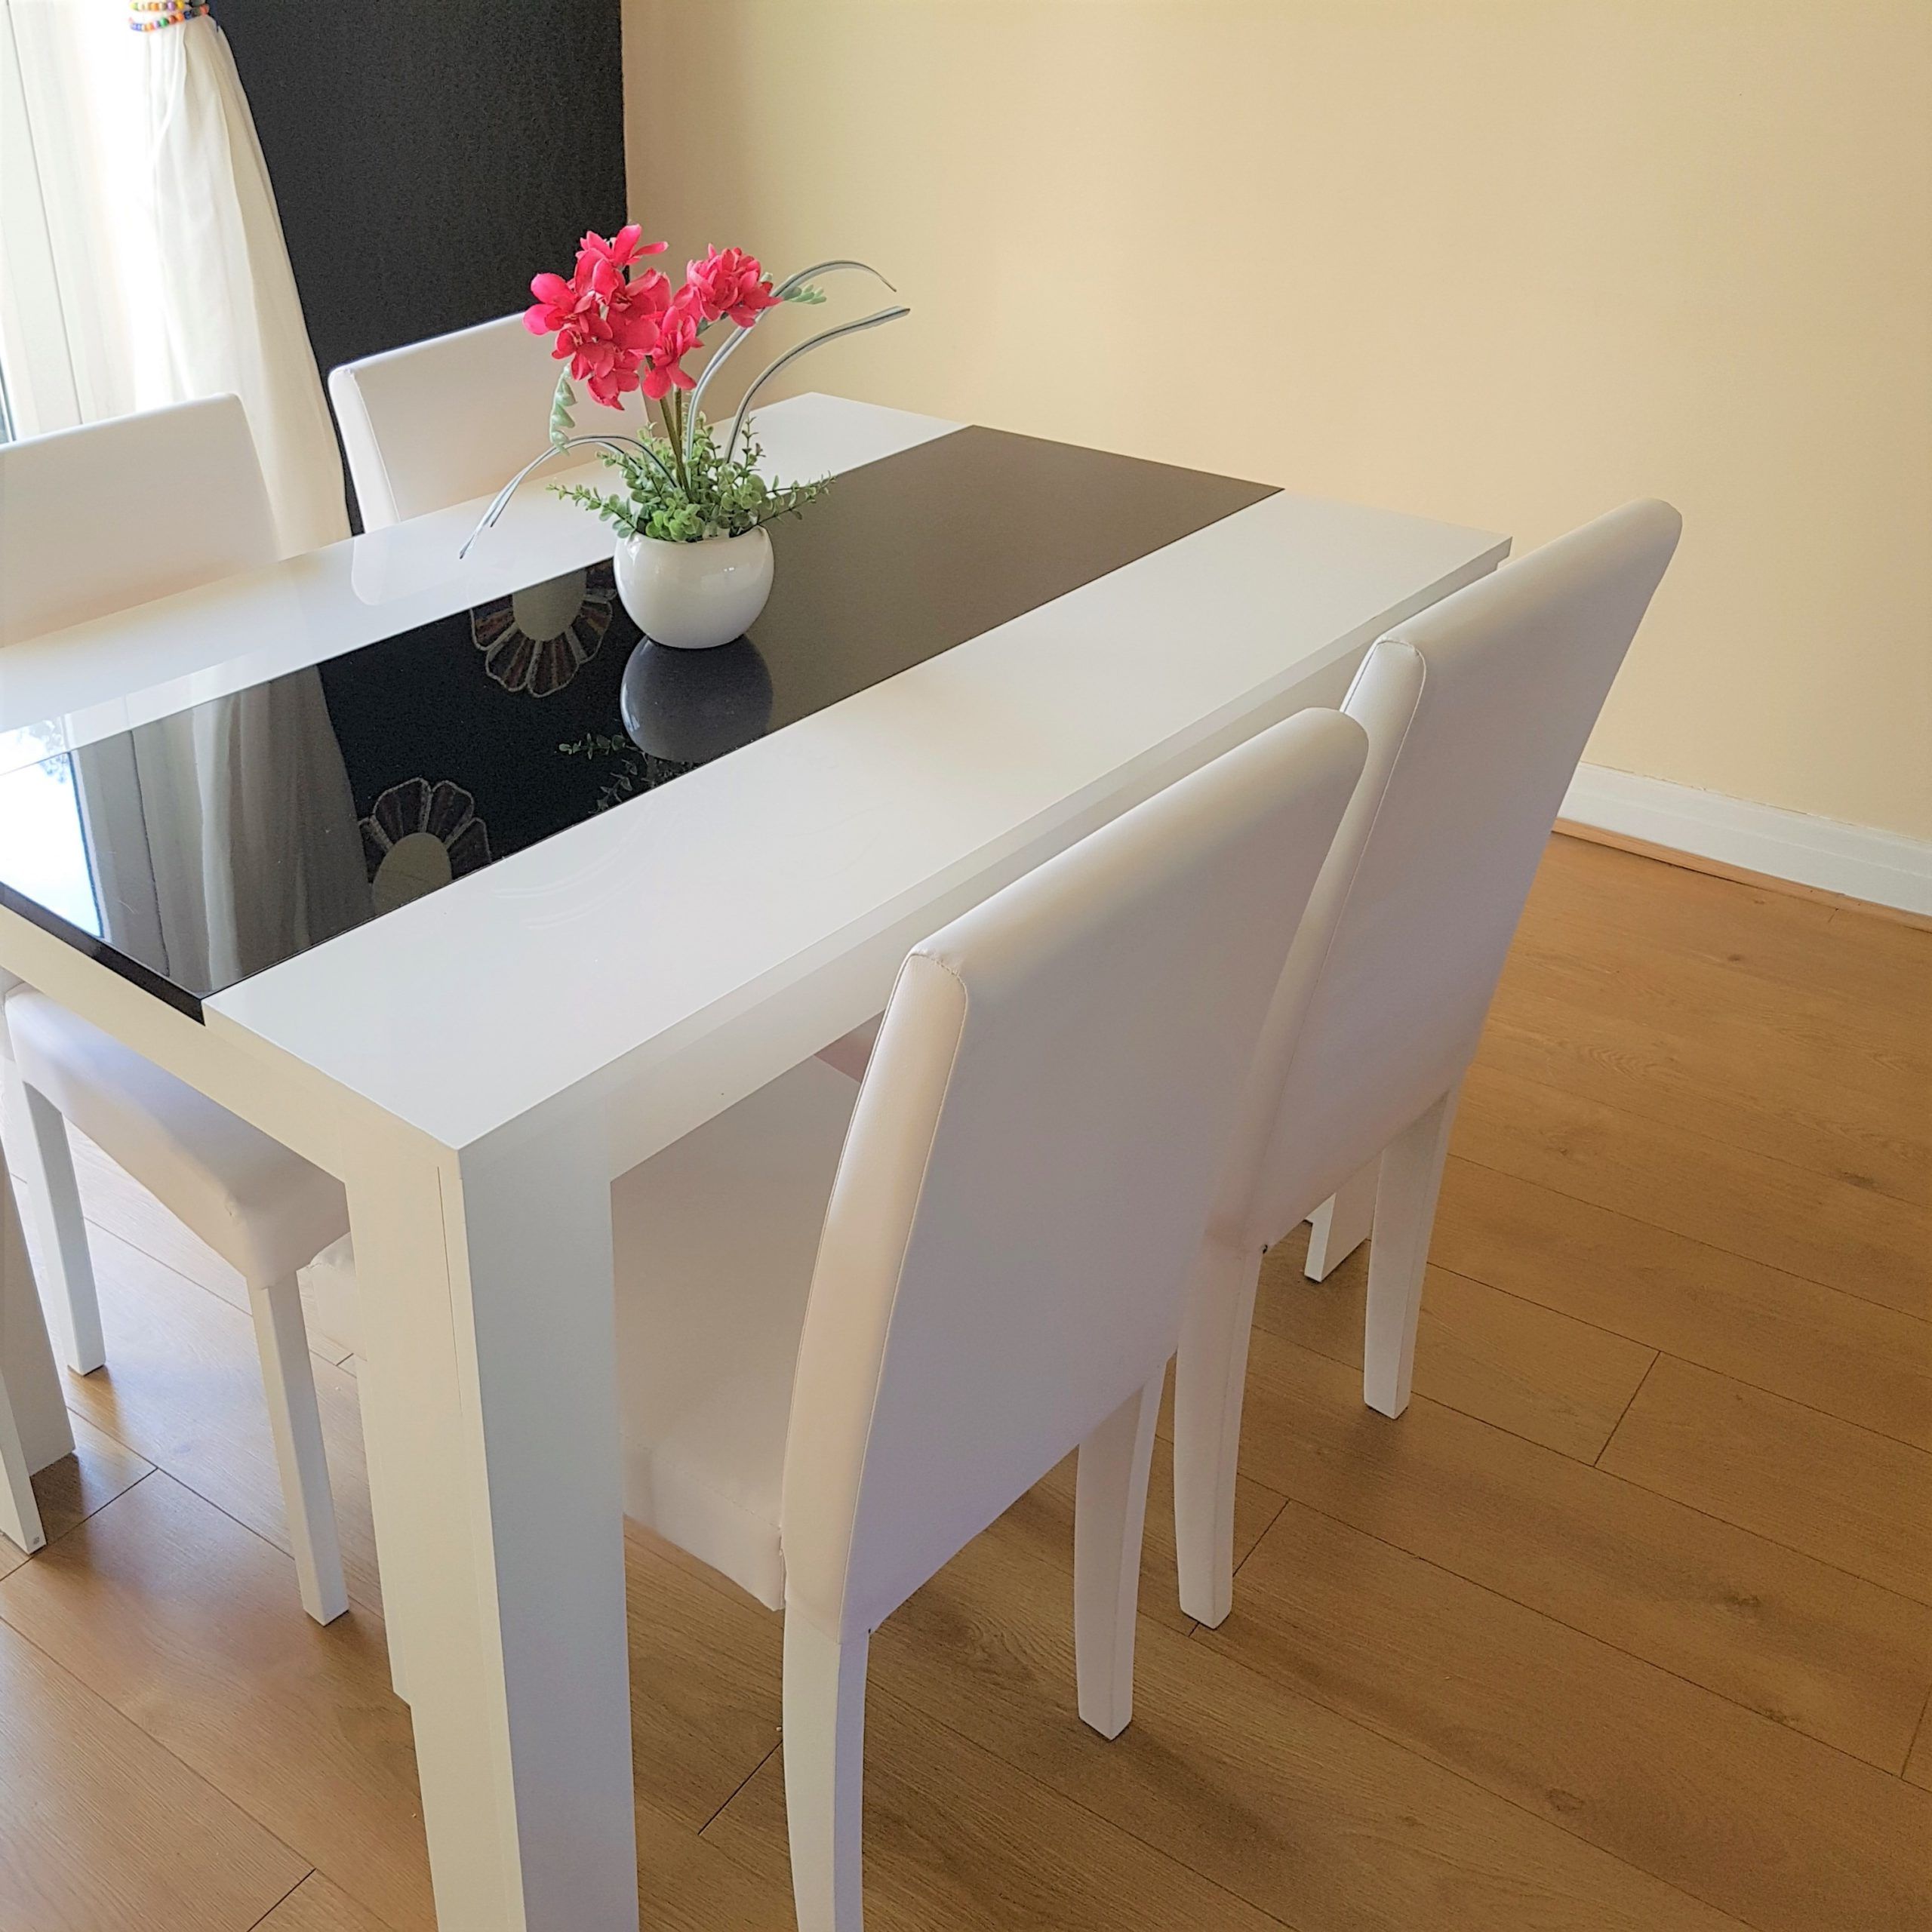 Preferred White And Black Dining Tables Intended For Modern White And Black Wood Dining Table With 4 White Faux (View 18 of 20)